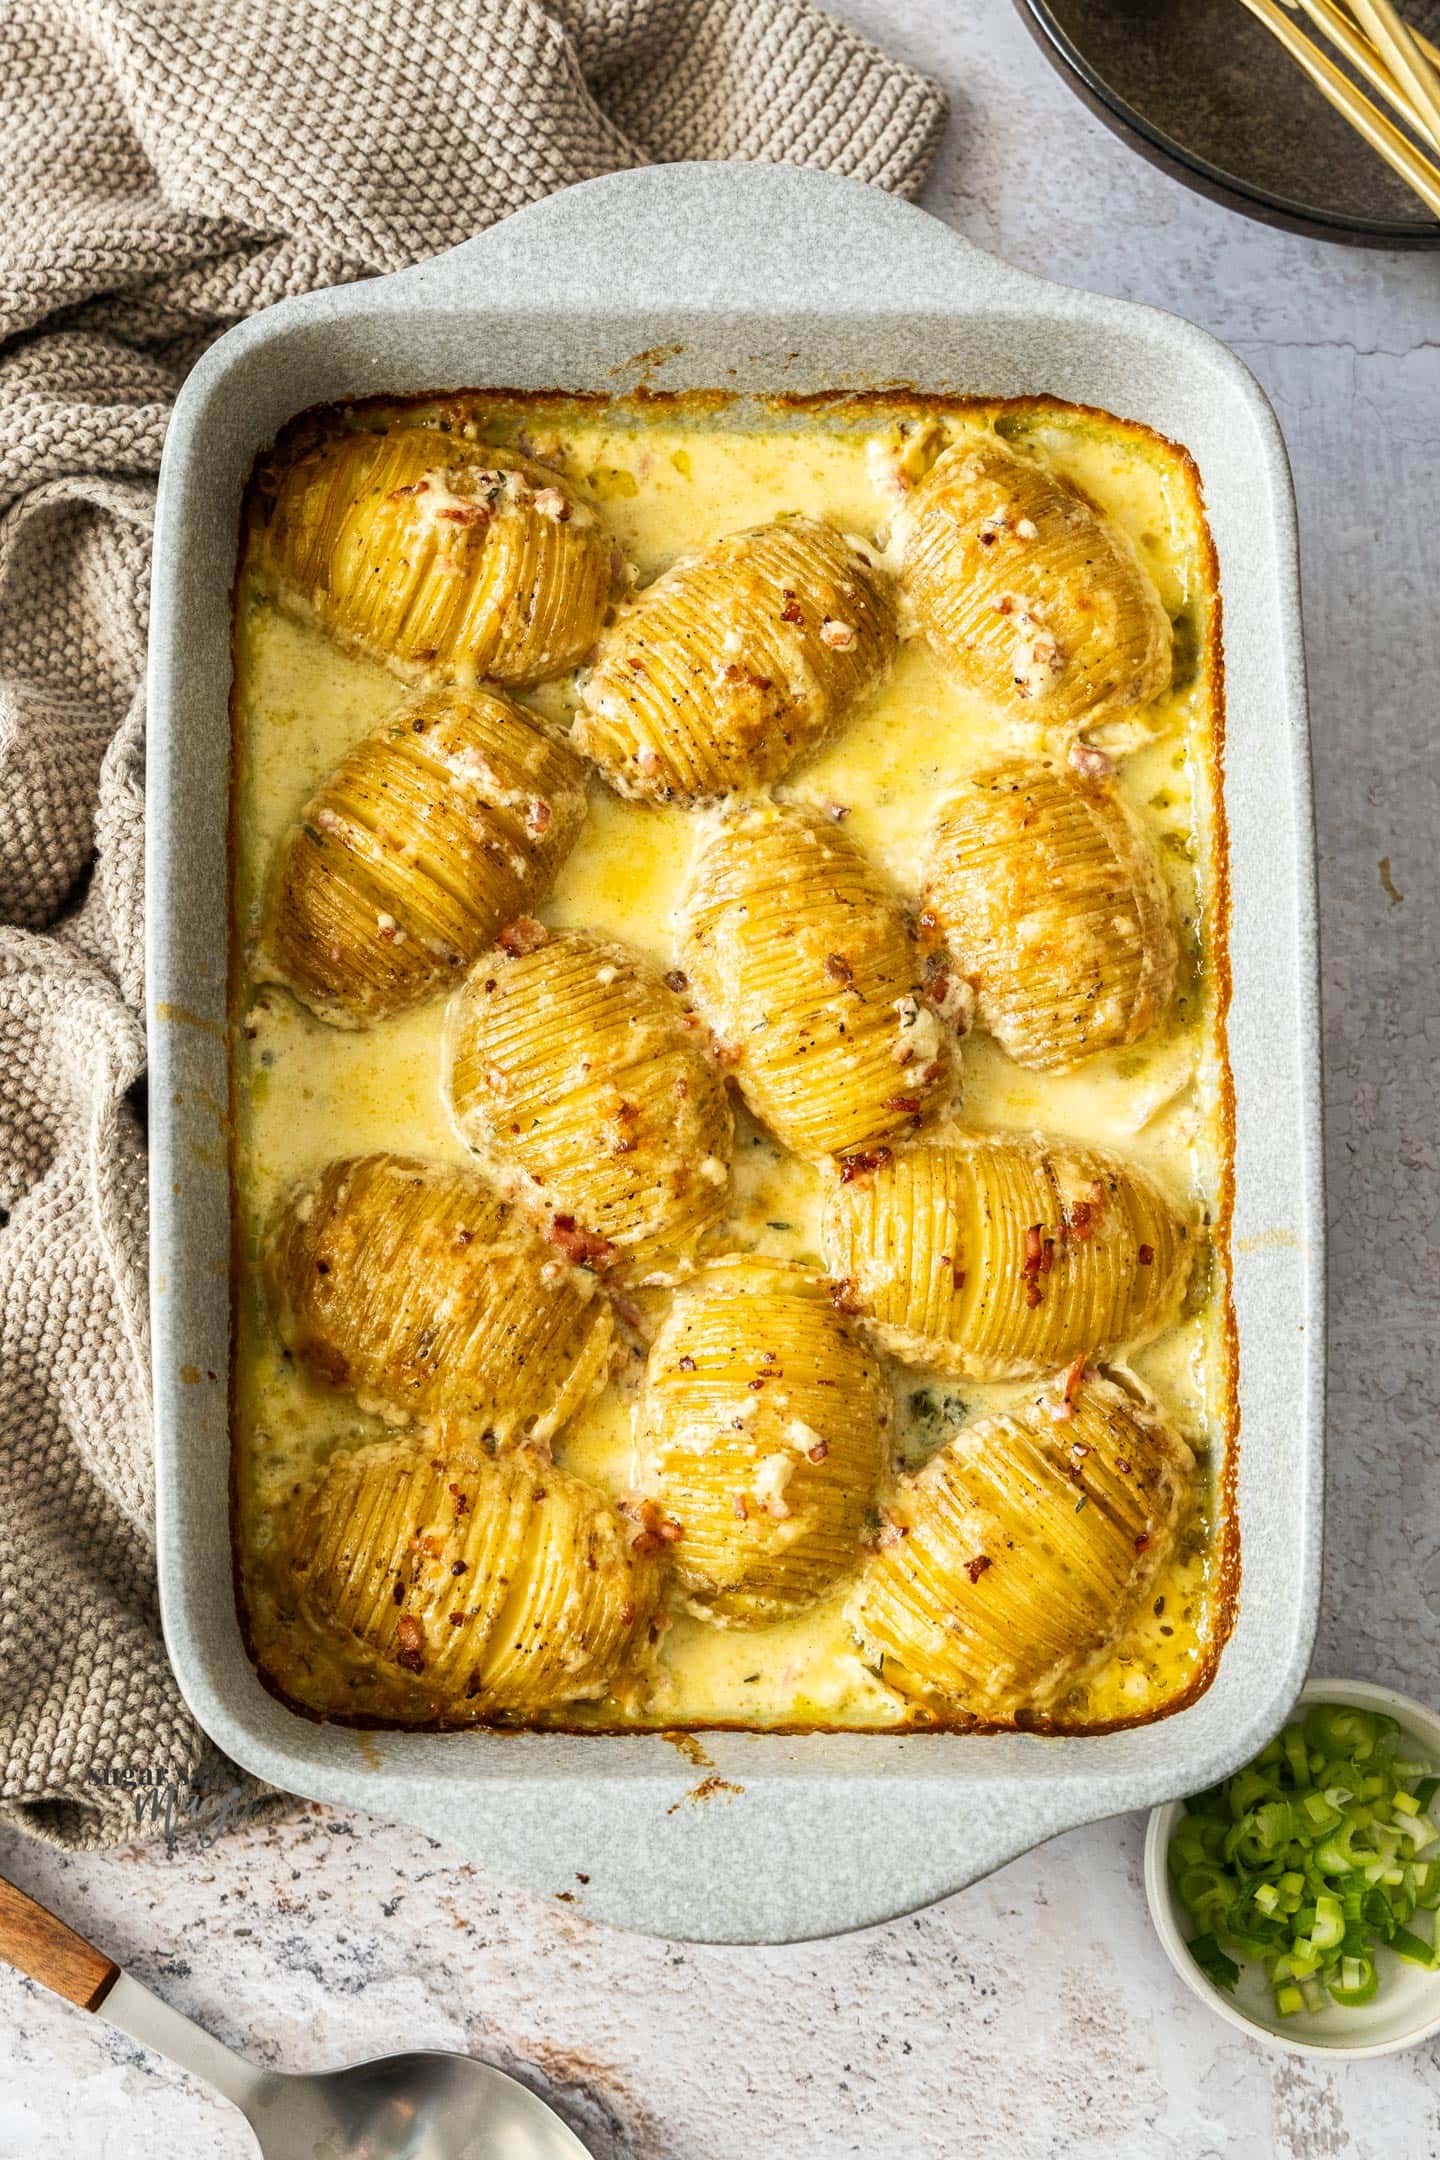 Roasted hasselback potatoes in cream in a casserole dish.